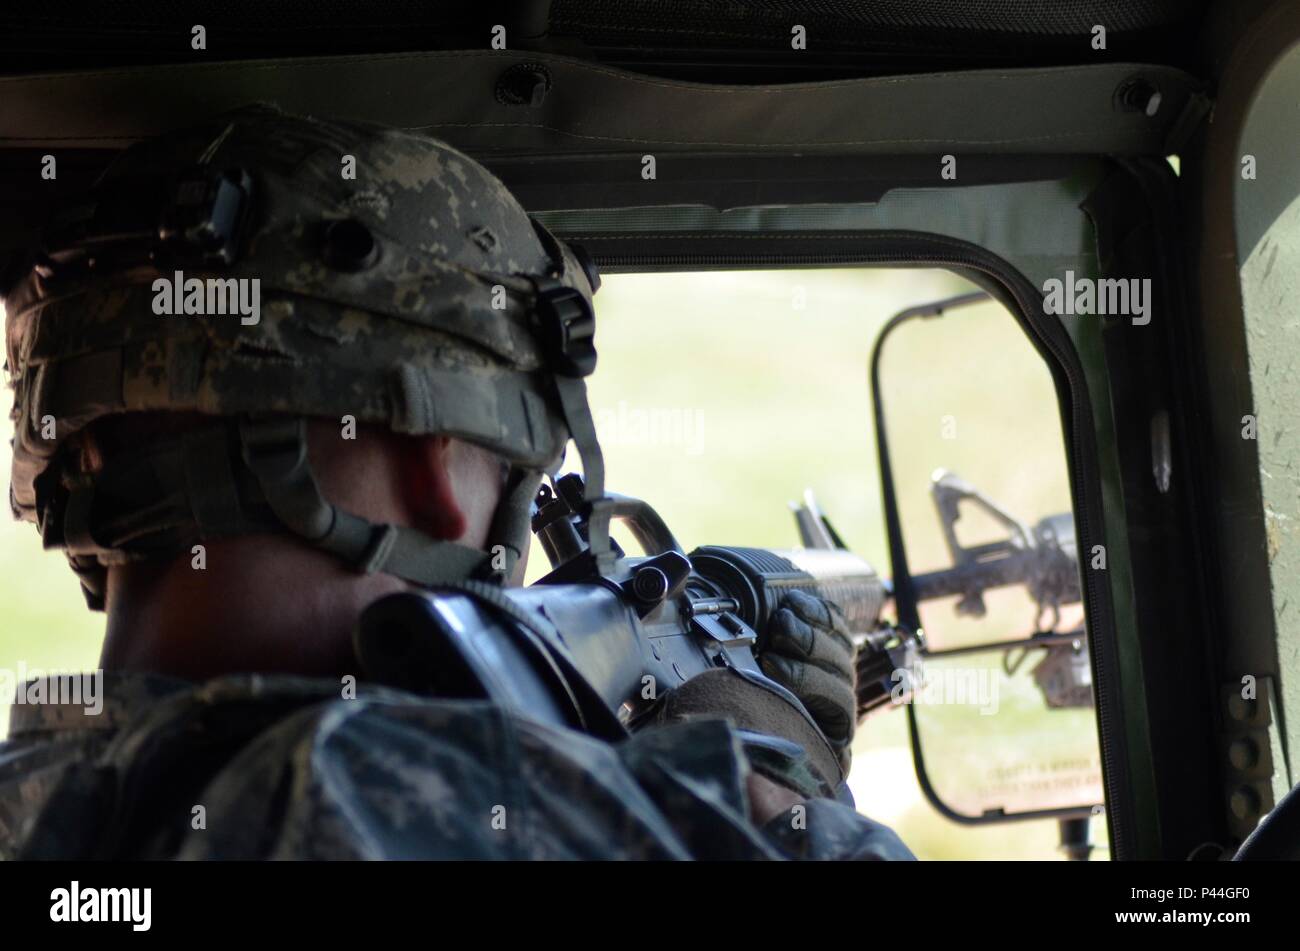 U.S. Army Sgt. Joseph Rogers of the 396th Medical Company (Ground Ambulance), Army Reserve, engages opposing forces during a simulated convoy ambush in support of the Golden Coyote exercise, Camp Guernsey, Wyo., June 15th, 2016. The Golden Coyote exercise is a three-phase, scenario-driven exercise conducted in the Black Hills of South Dakota and Wyoming, which enables commanders to focus on mission essential task requirements, warrior tasks and battle drills. (U.S. Army photo by Pfc. Michael Britt/Released) Stock Photo